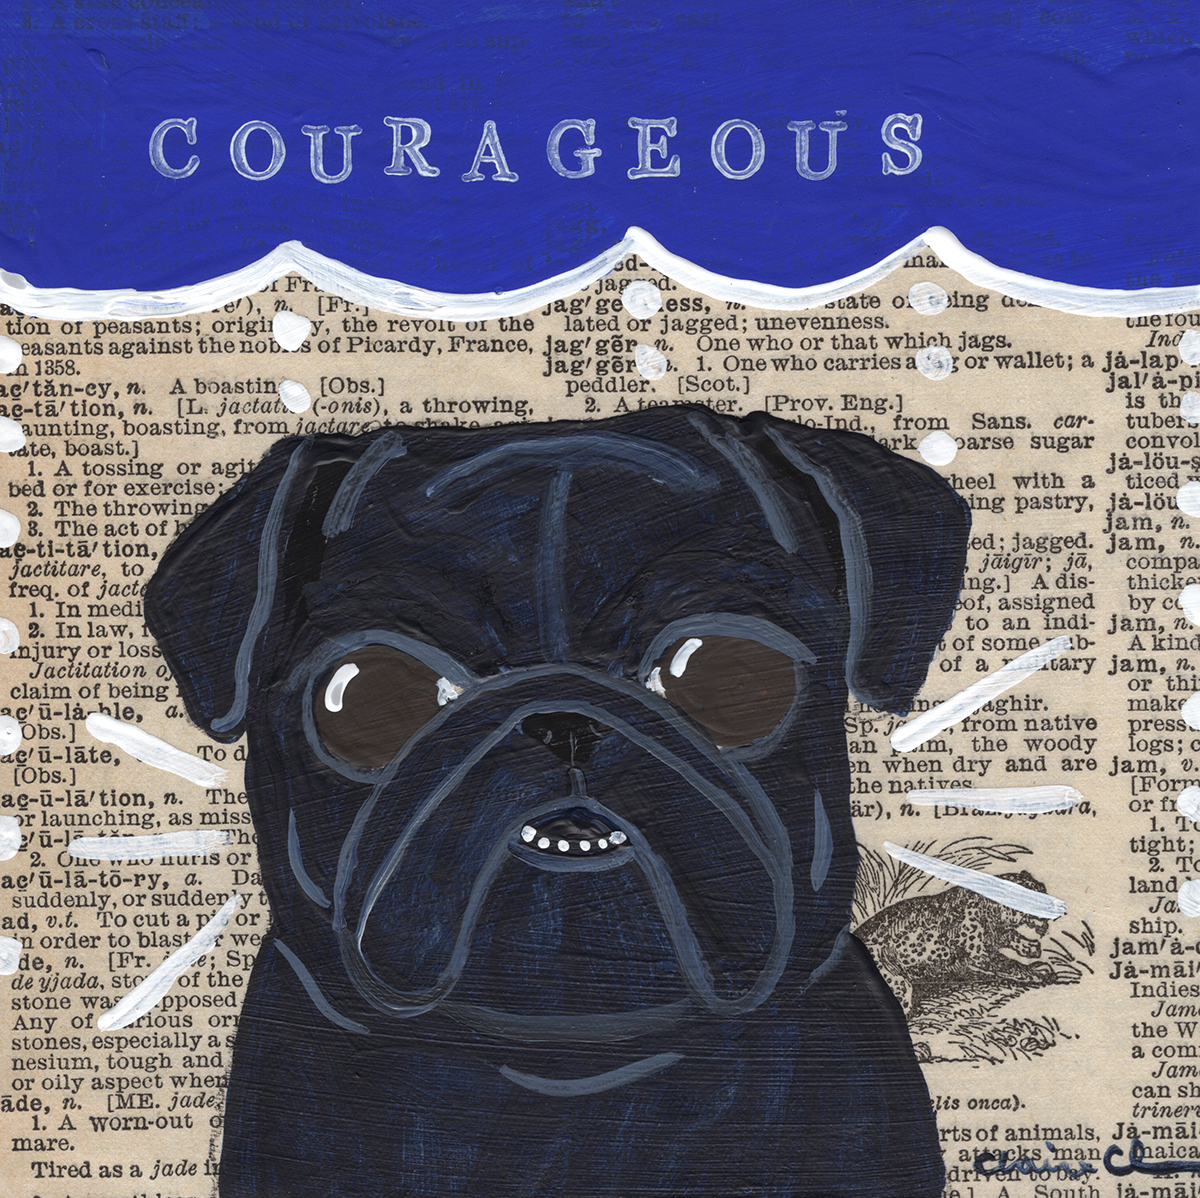 Courageous - Original Word of the Year Painting